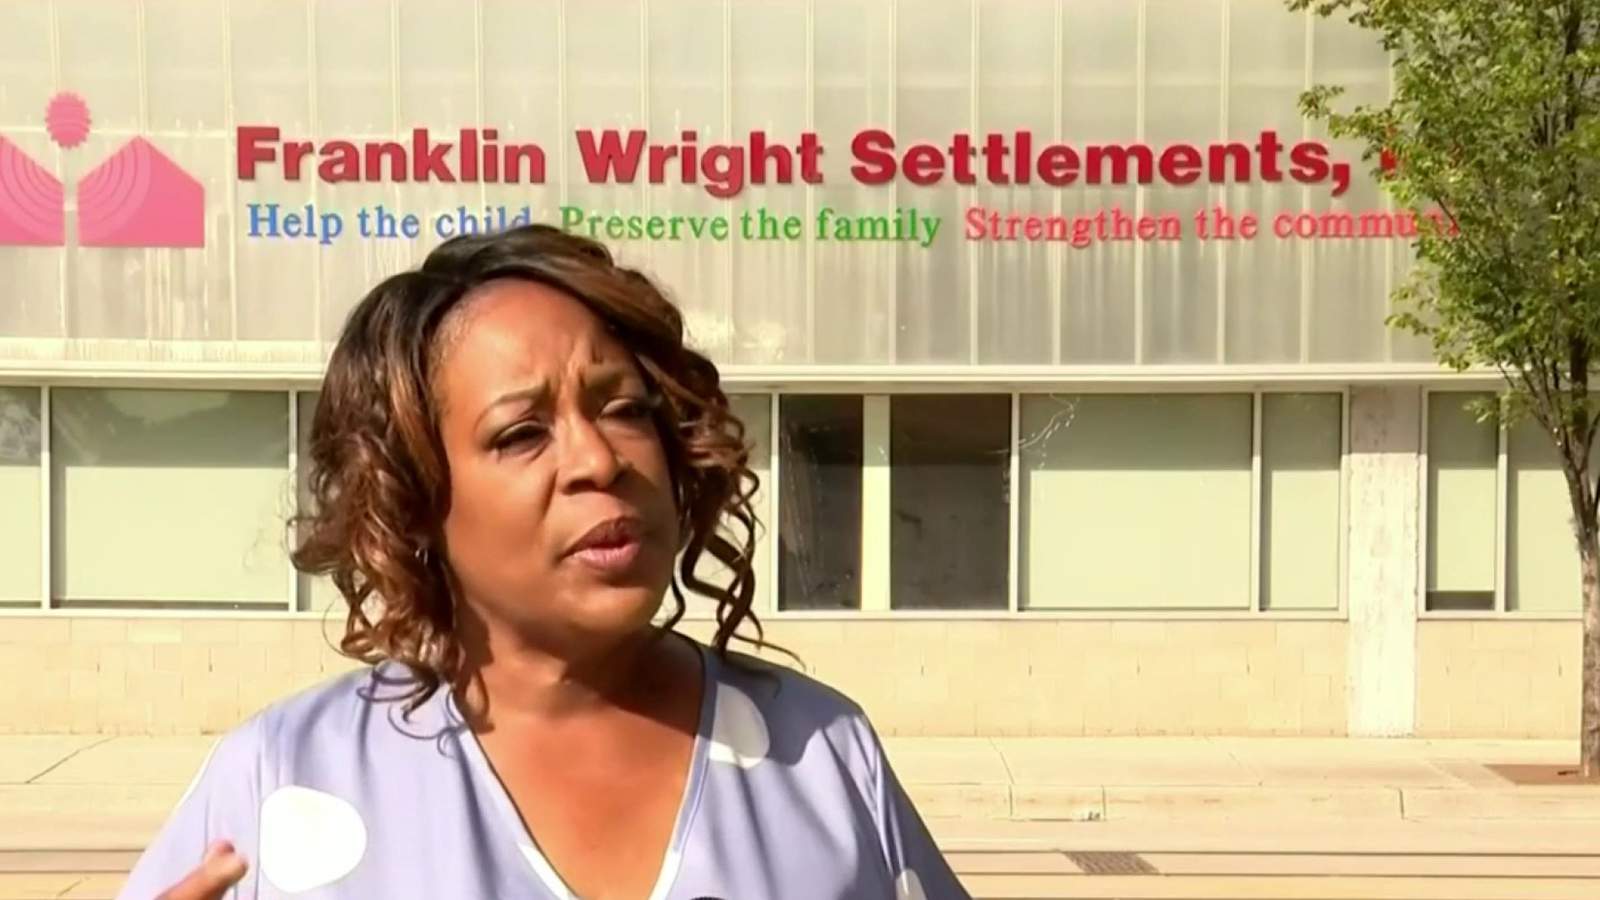 How Franklin Wright Settlements helps guide families through life